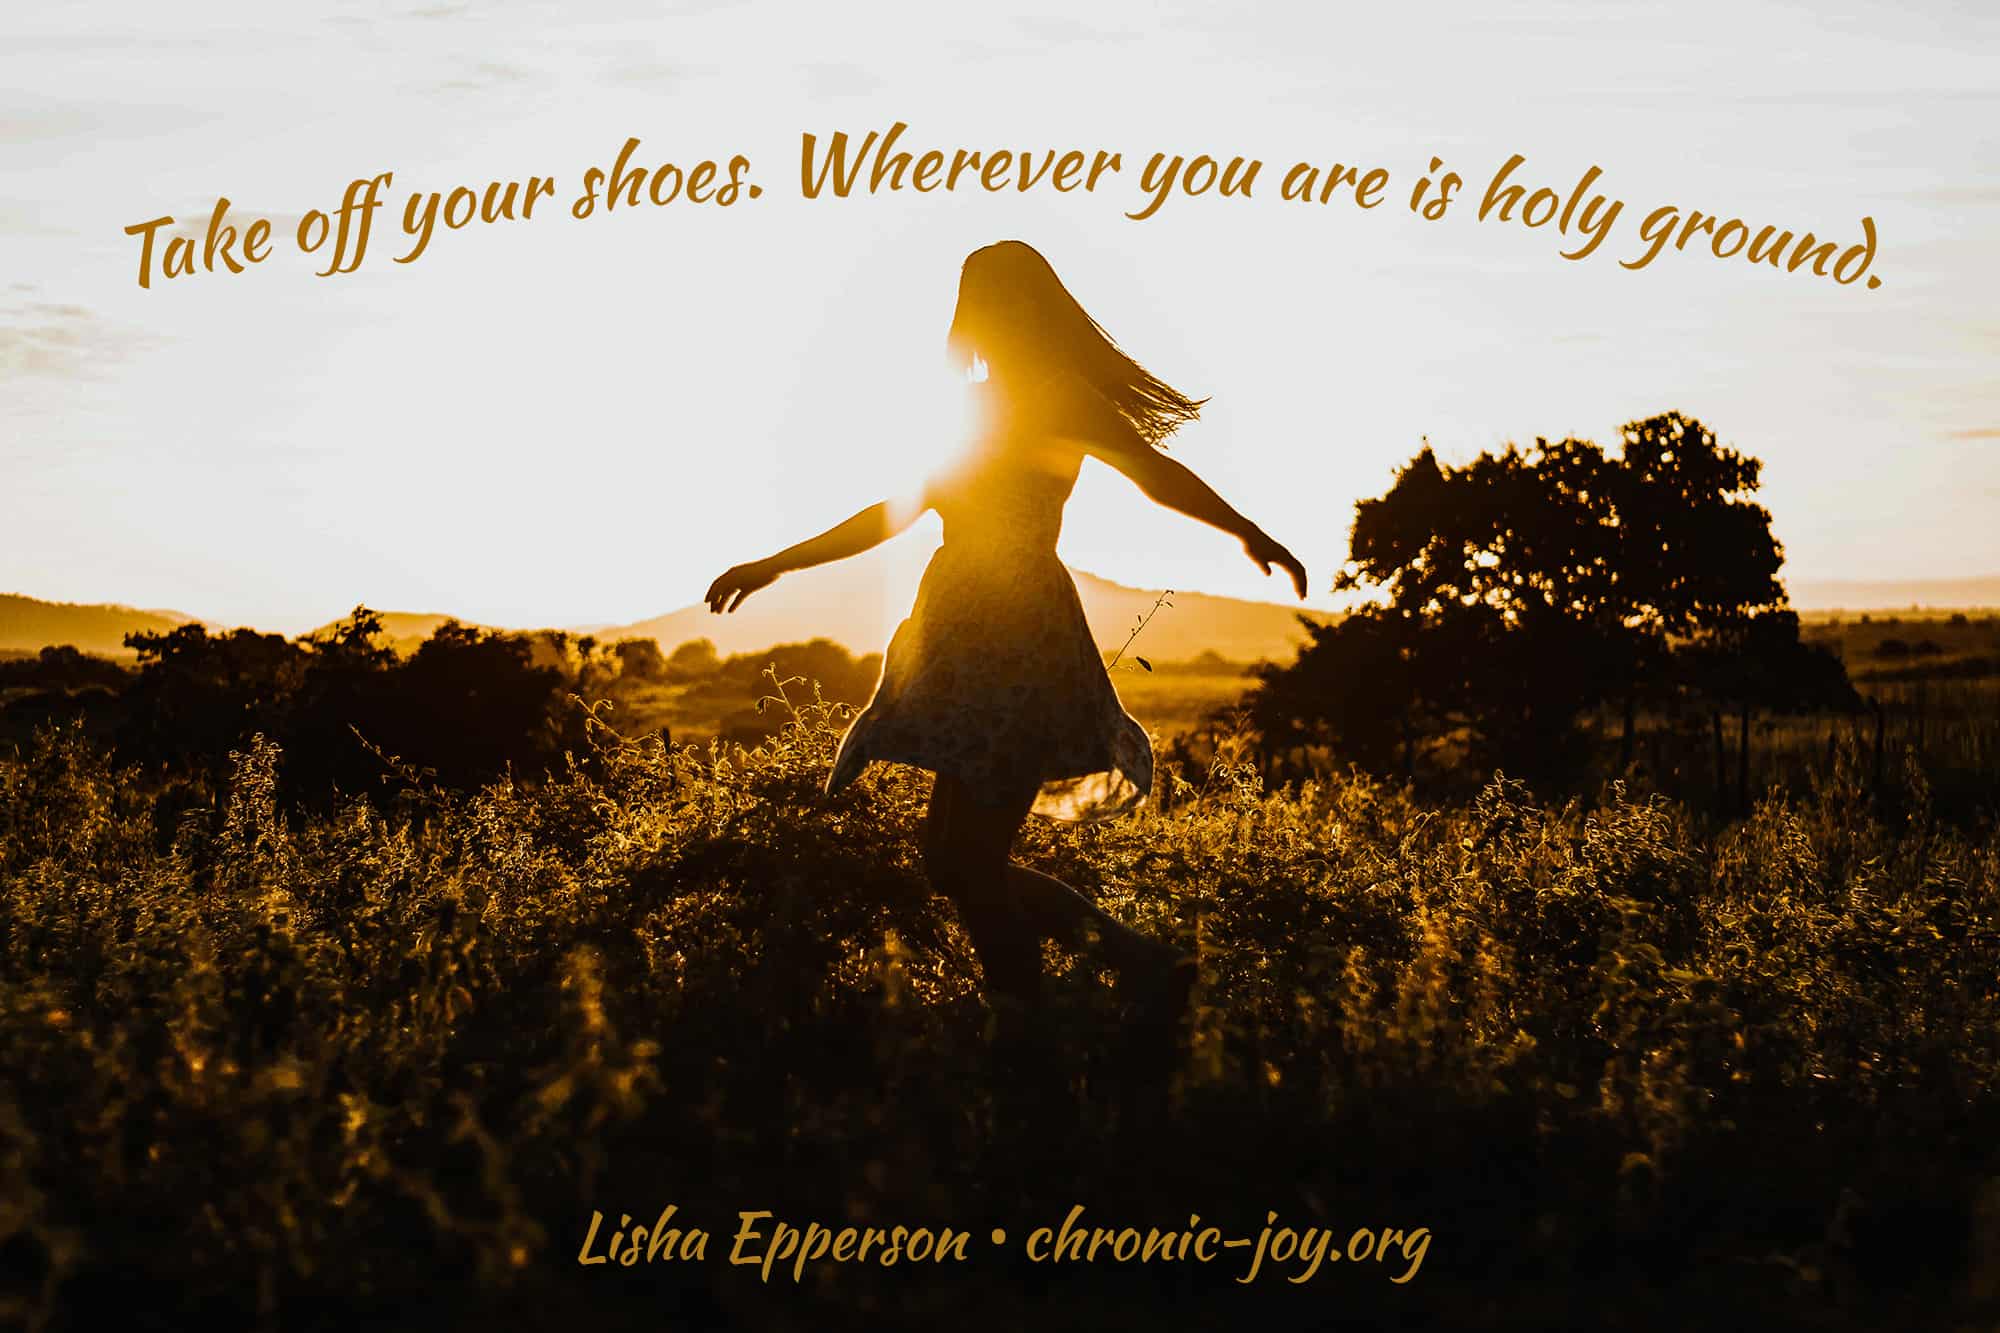 "Take off your shoes. Wherever you are is holy ground." Lisha Epperson